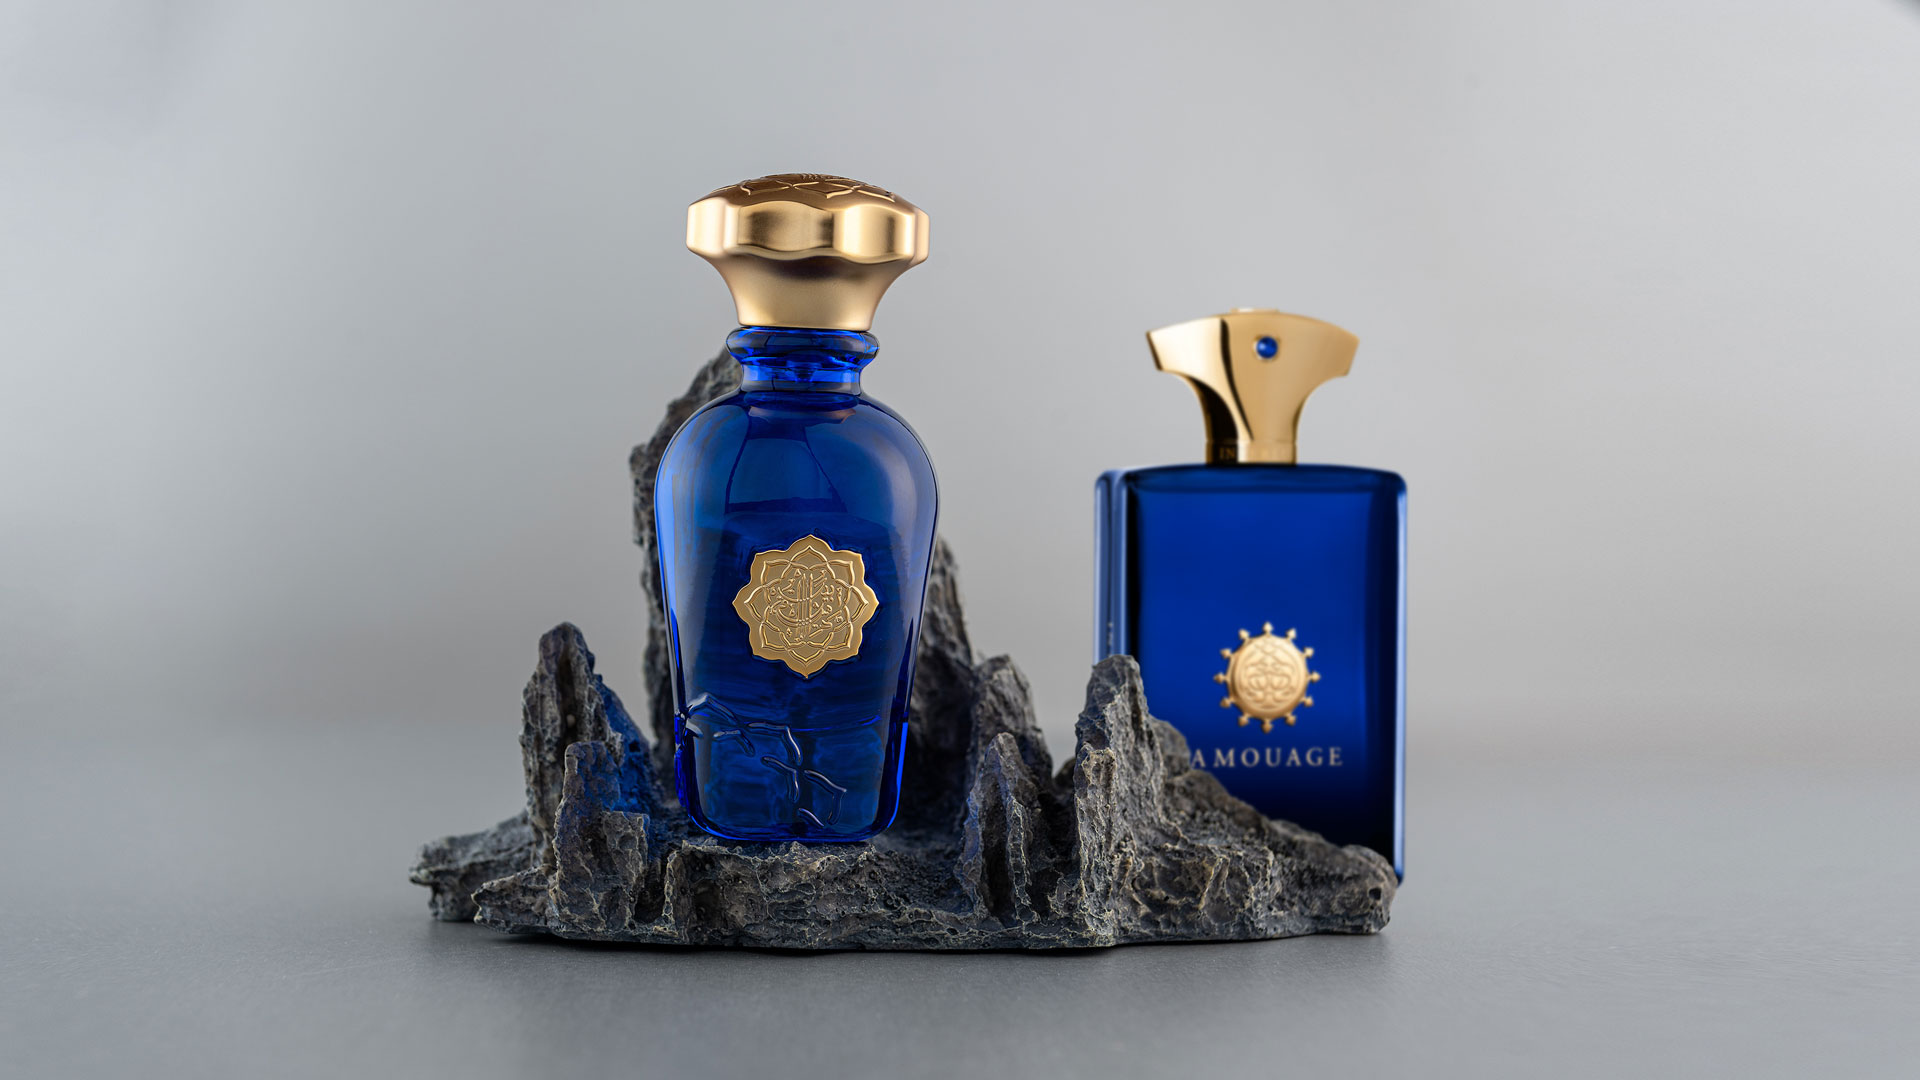 Make Your Loved Ones Feel Special With These Extraordinary Amouage Fragrances